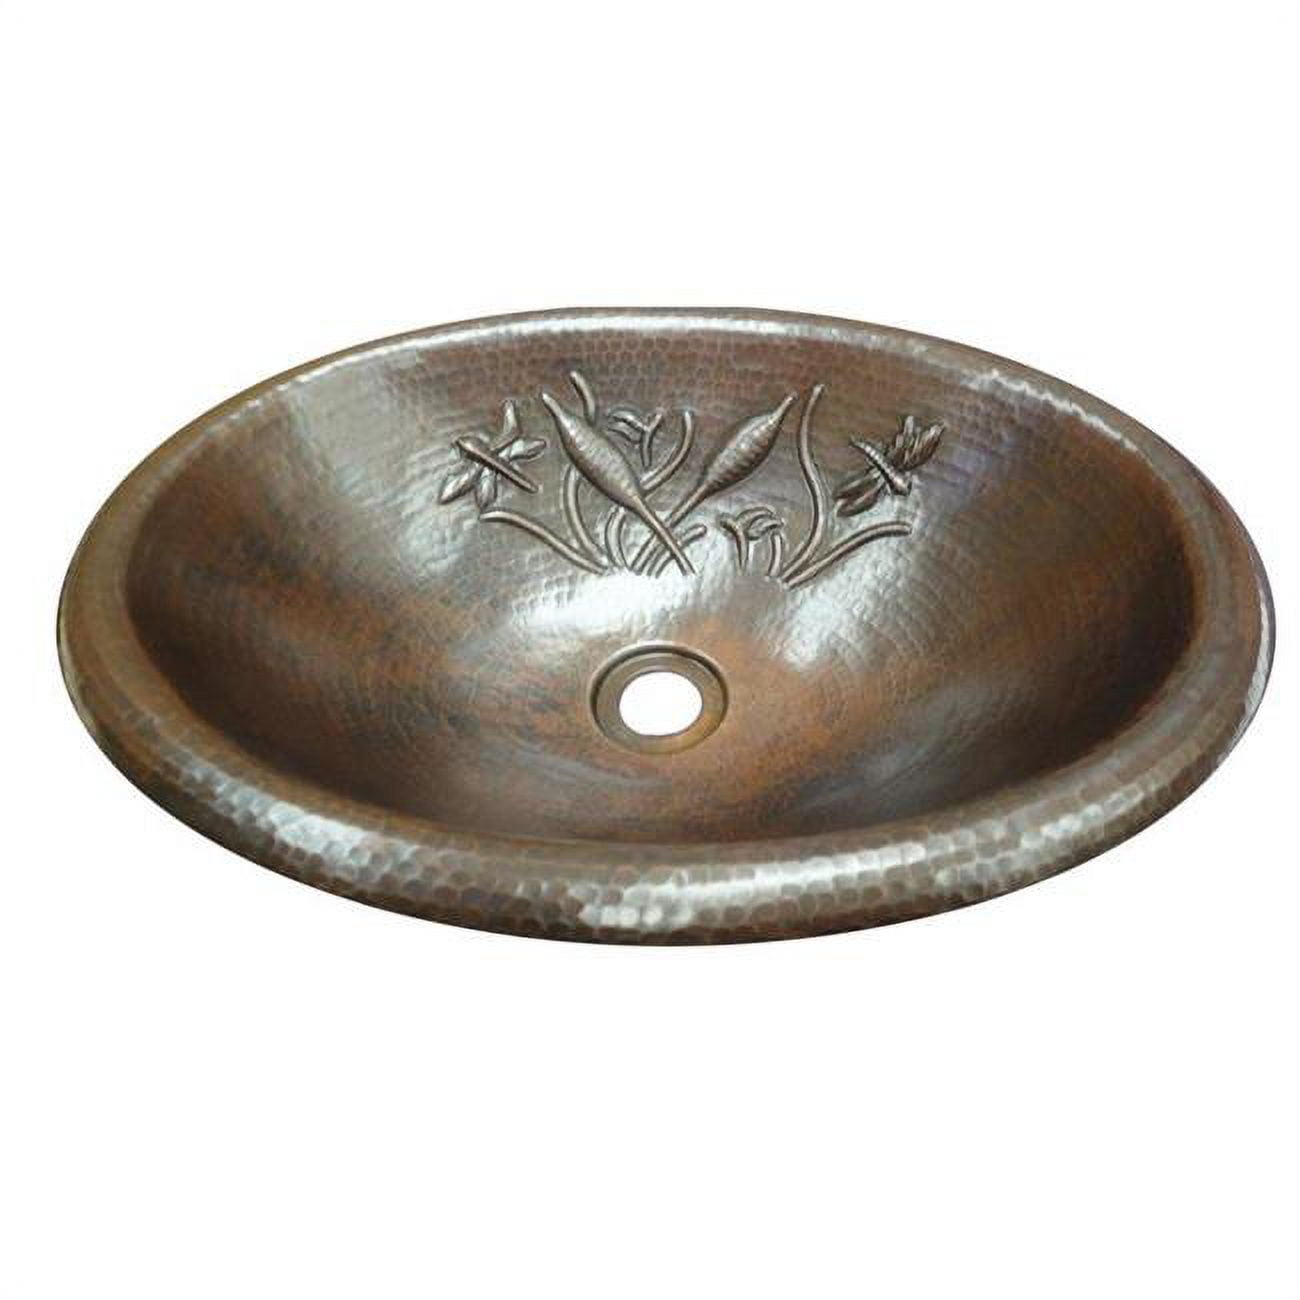 Cos-d-19-rl-br Copper Oval Bath Sink With Design, Bright - 6 X 14 X 19 In.